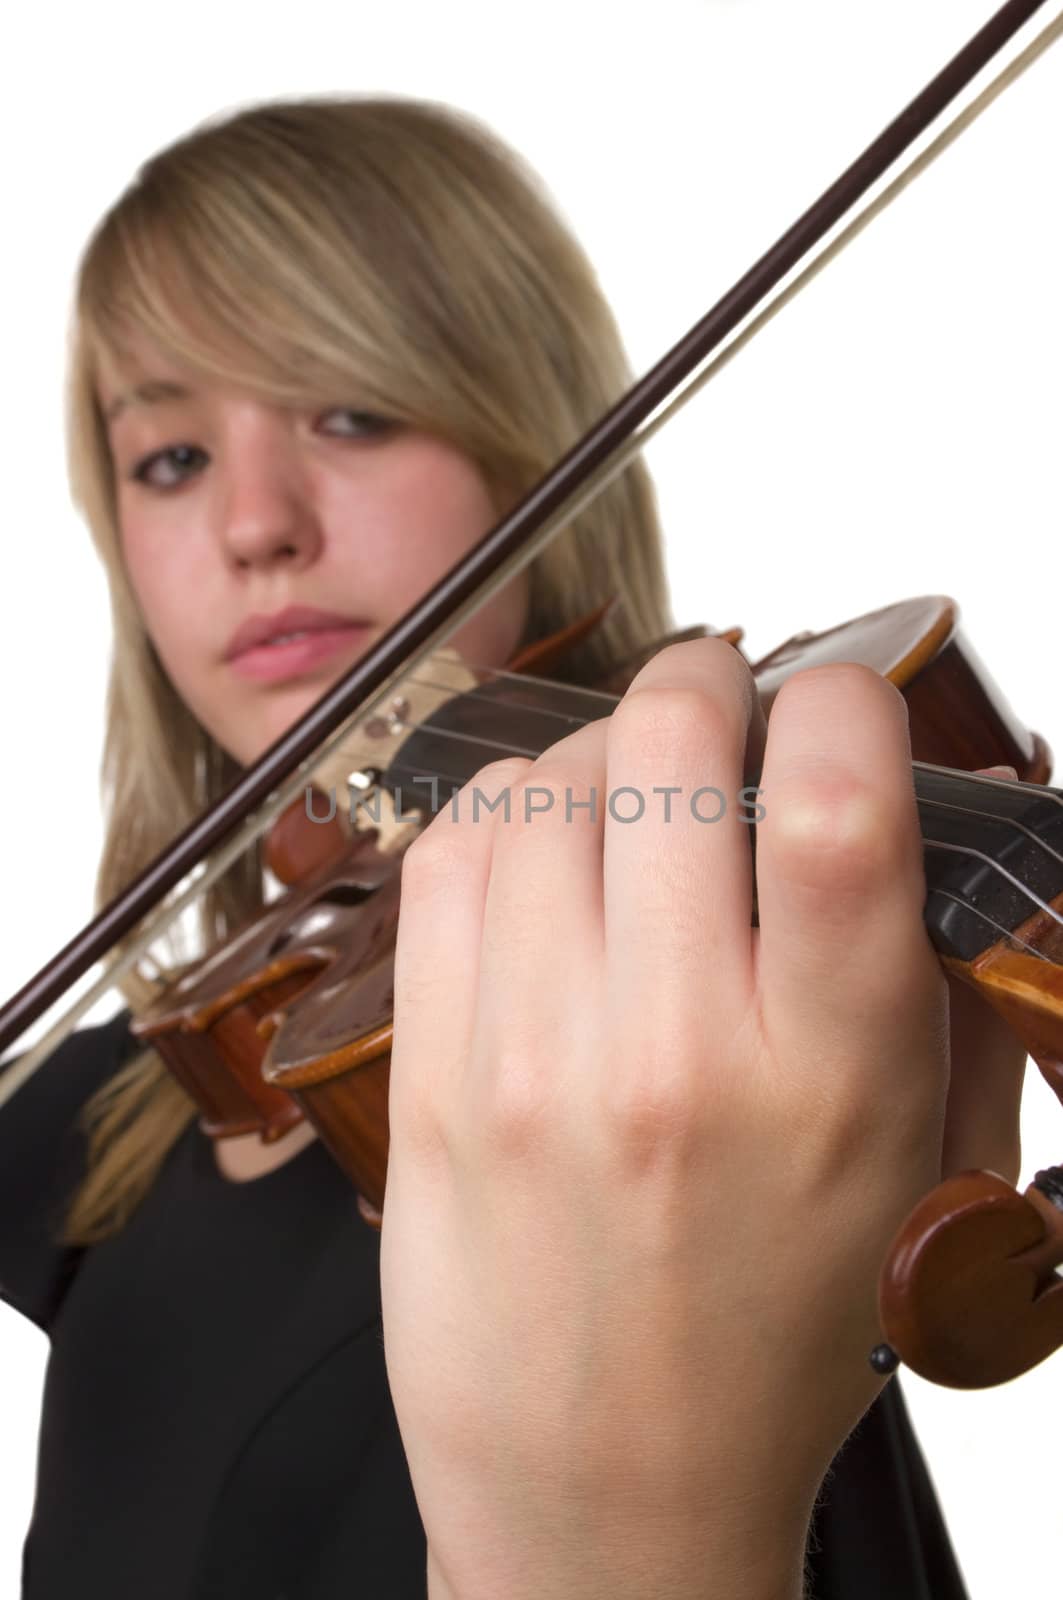 A beautiful teenager playing her violin